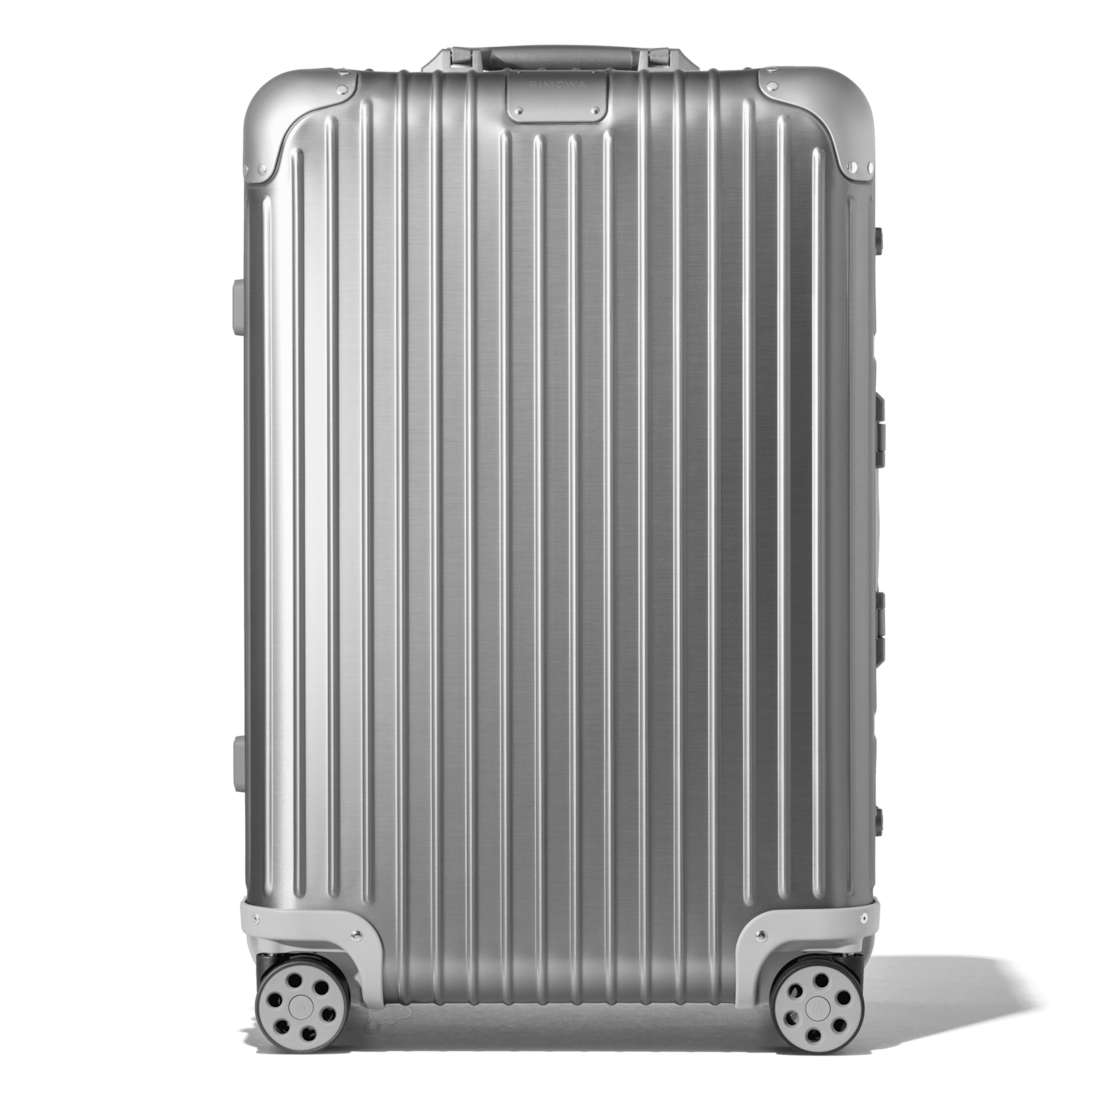 RIMOWA Check-In: Best Checked Luggage for Frequent Flyers